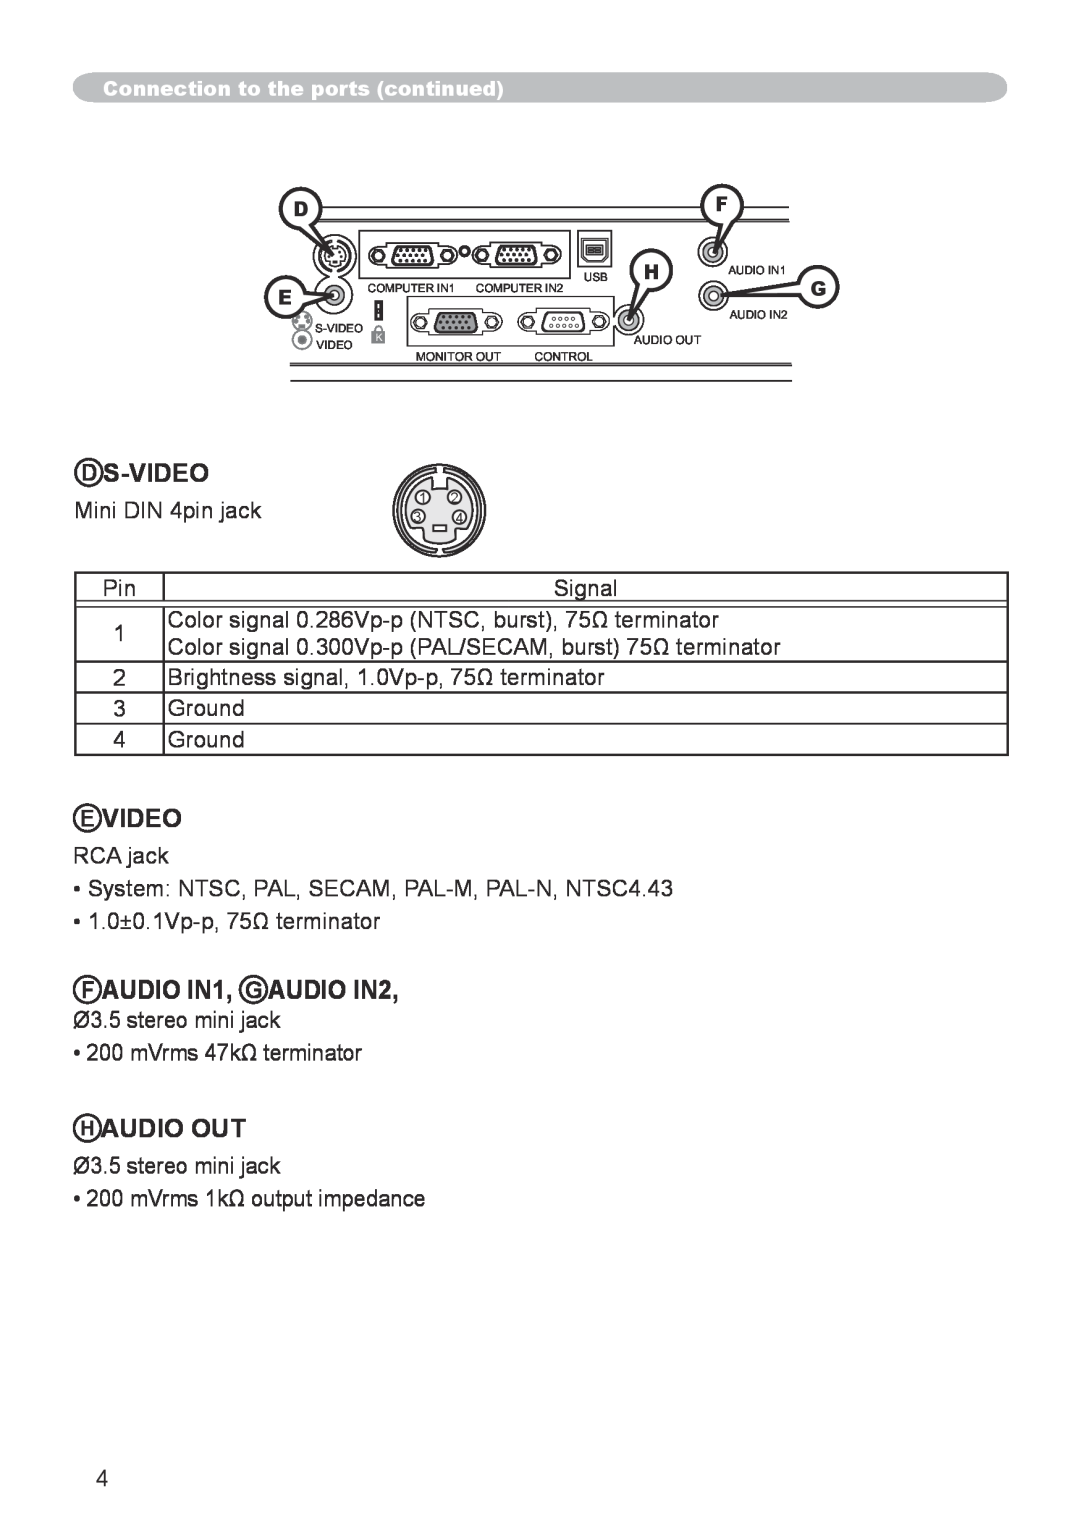 Hitachi CP-X253 user manual D S-Video, E Video, F AUDIO IN1, G AUDIO IN2, H Audio Out, Connection to the ports continued 